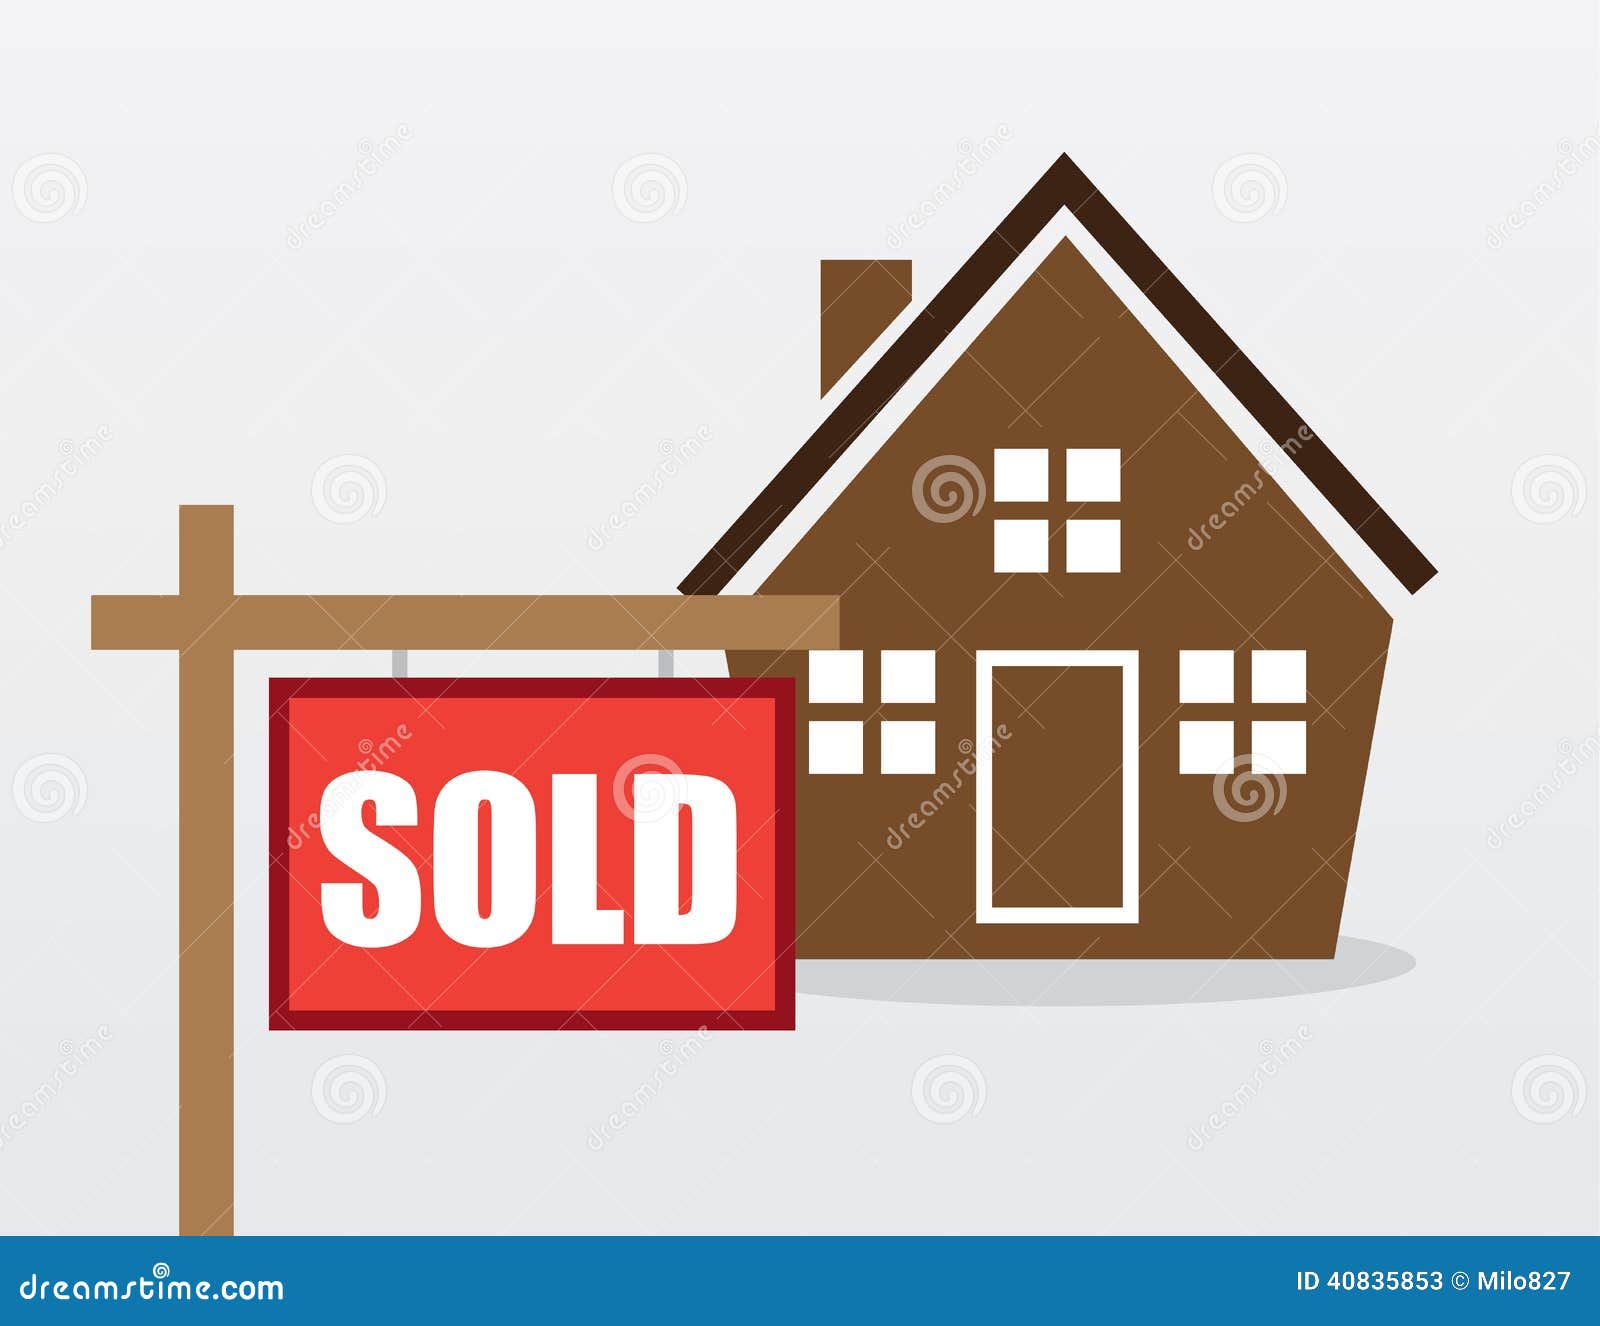 clipart houses for sale - photo #17